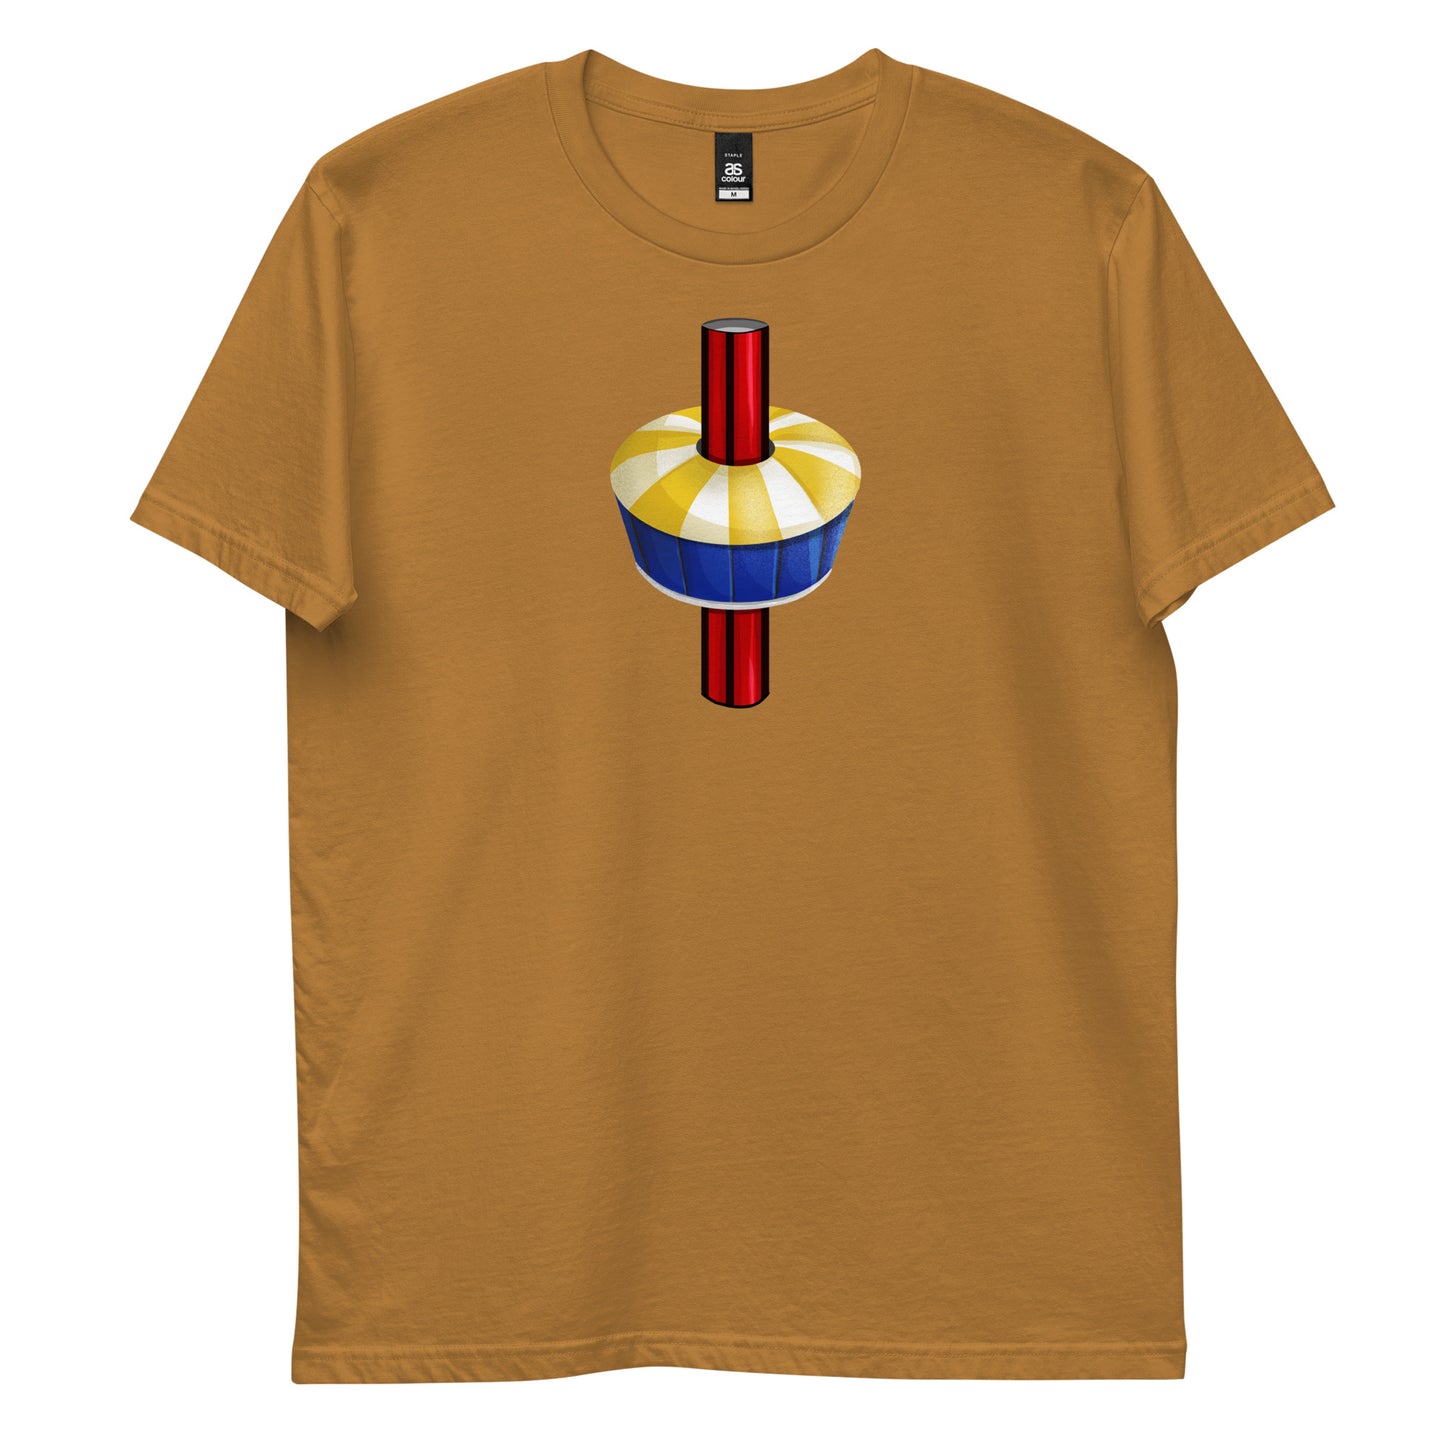 Observation Tower Tee